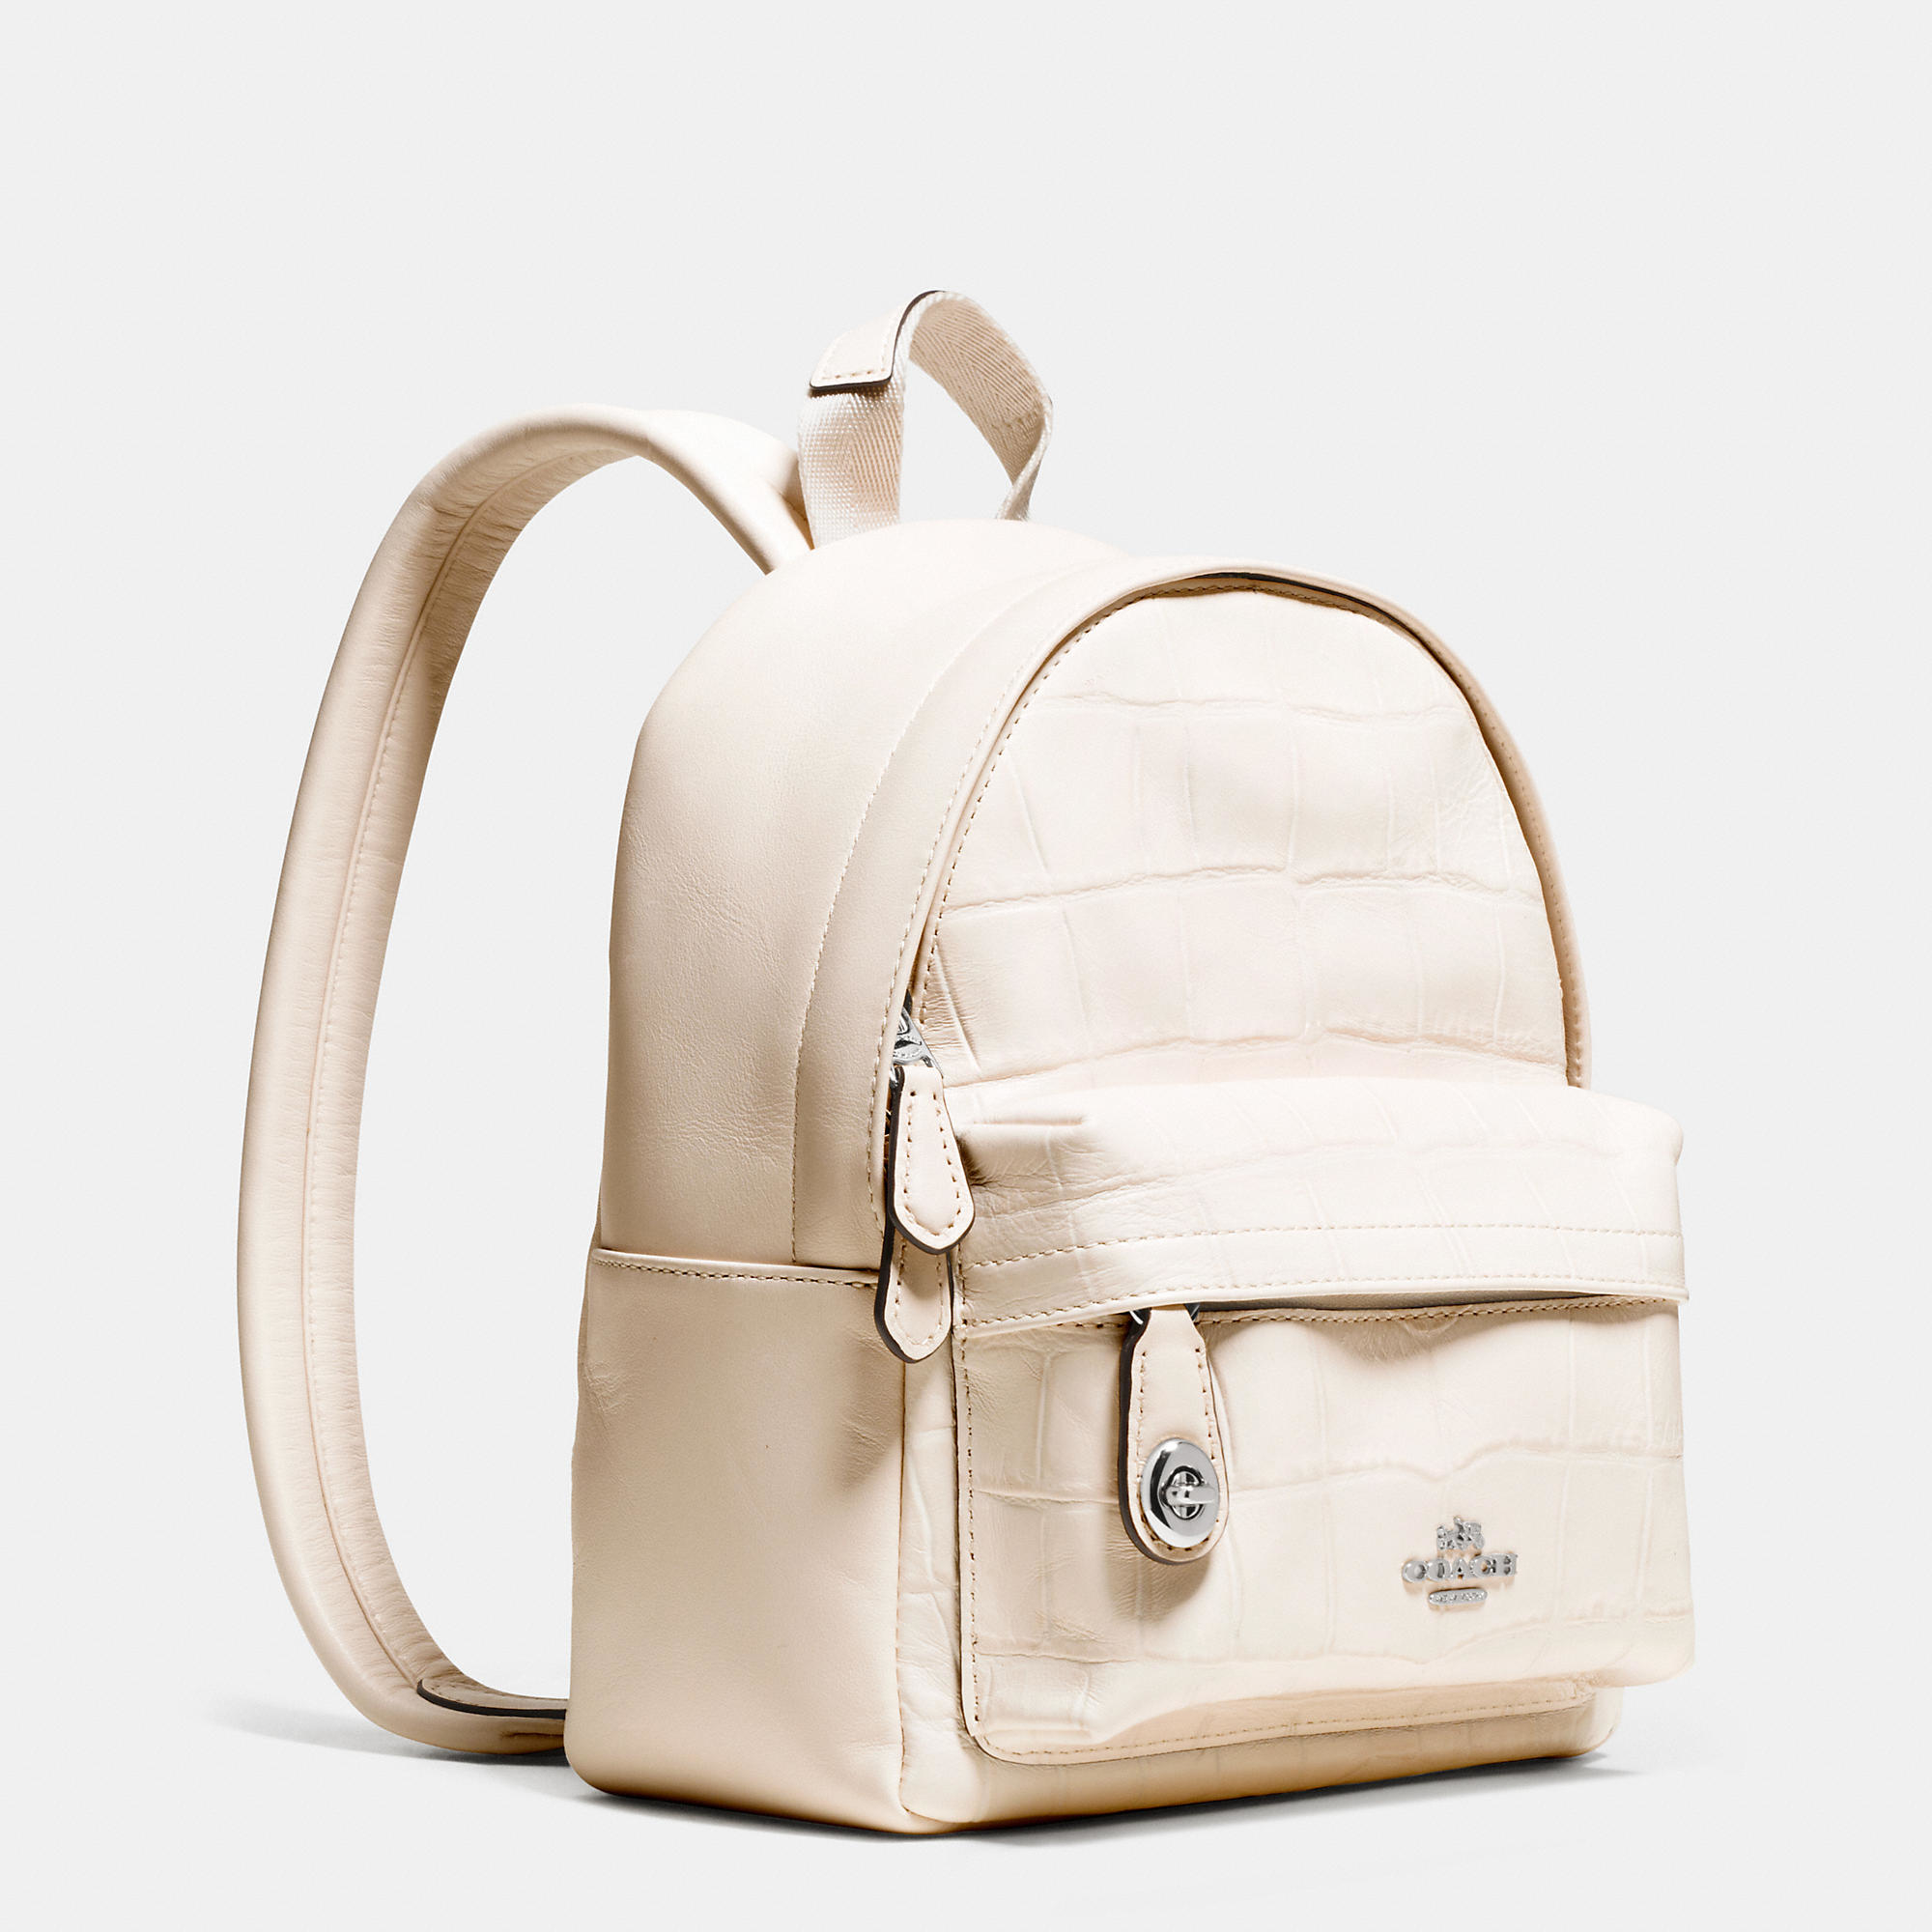 Lyst Coach Mini Campus Backpack In Croc Embossed Leather in White